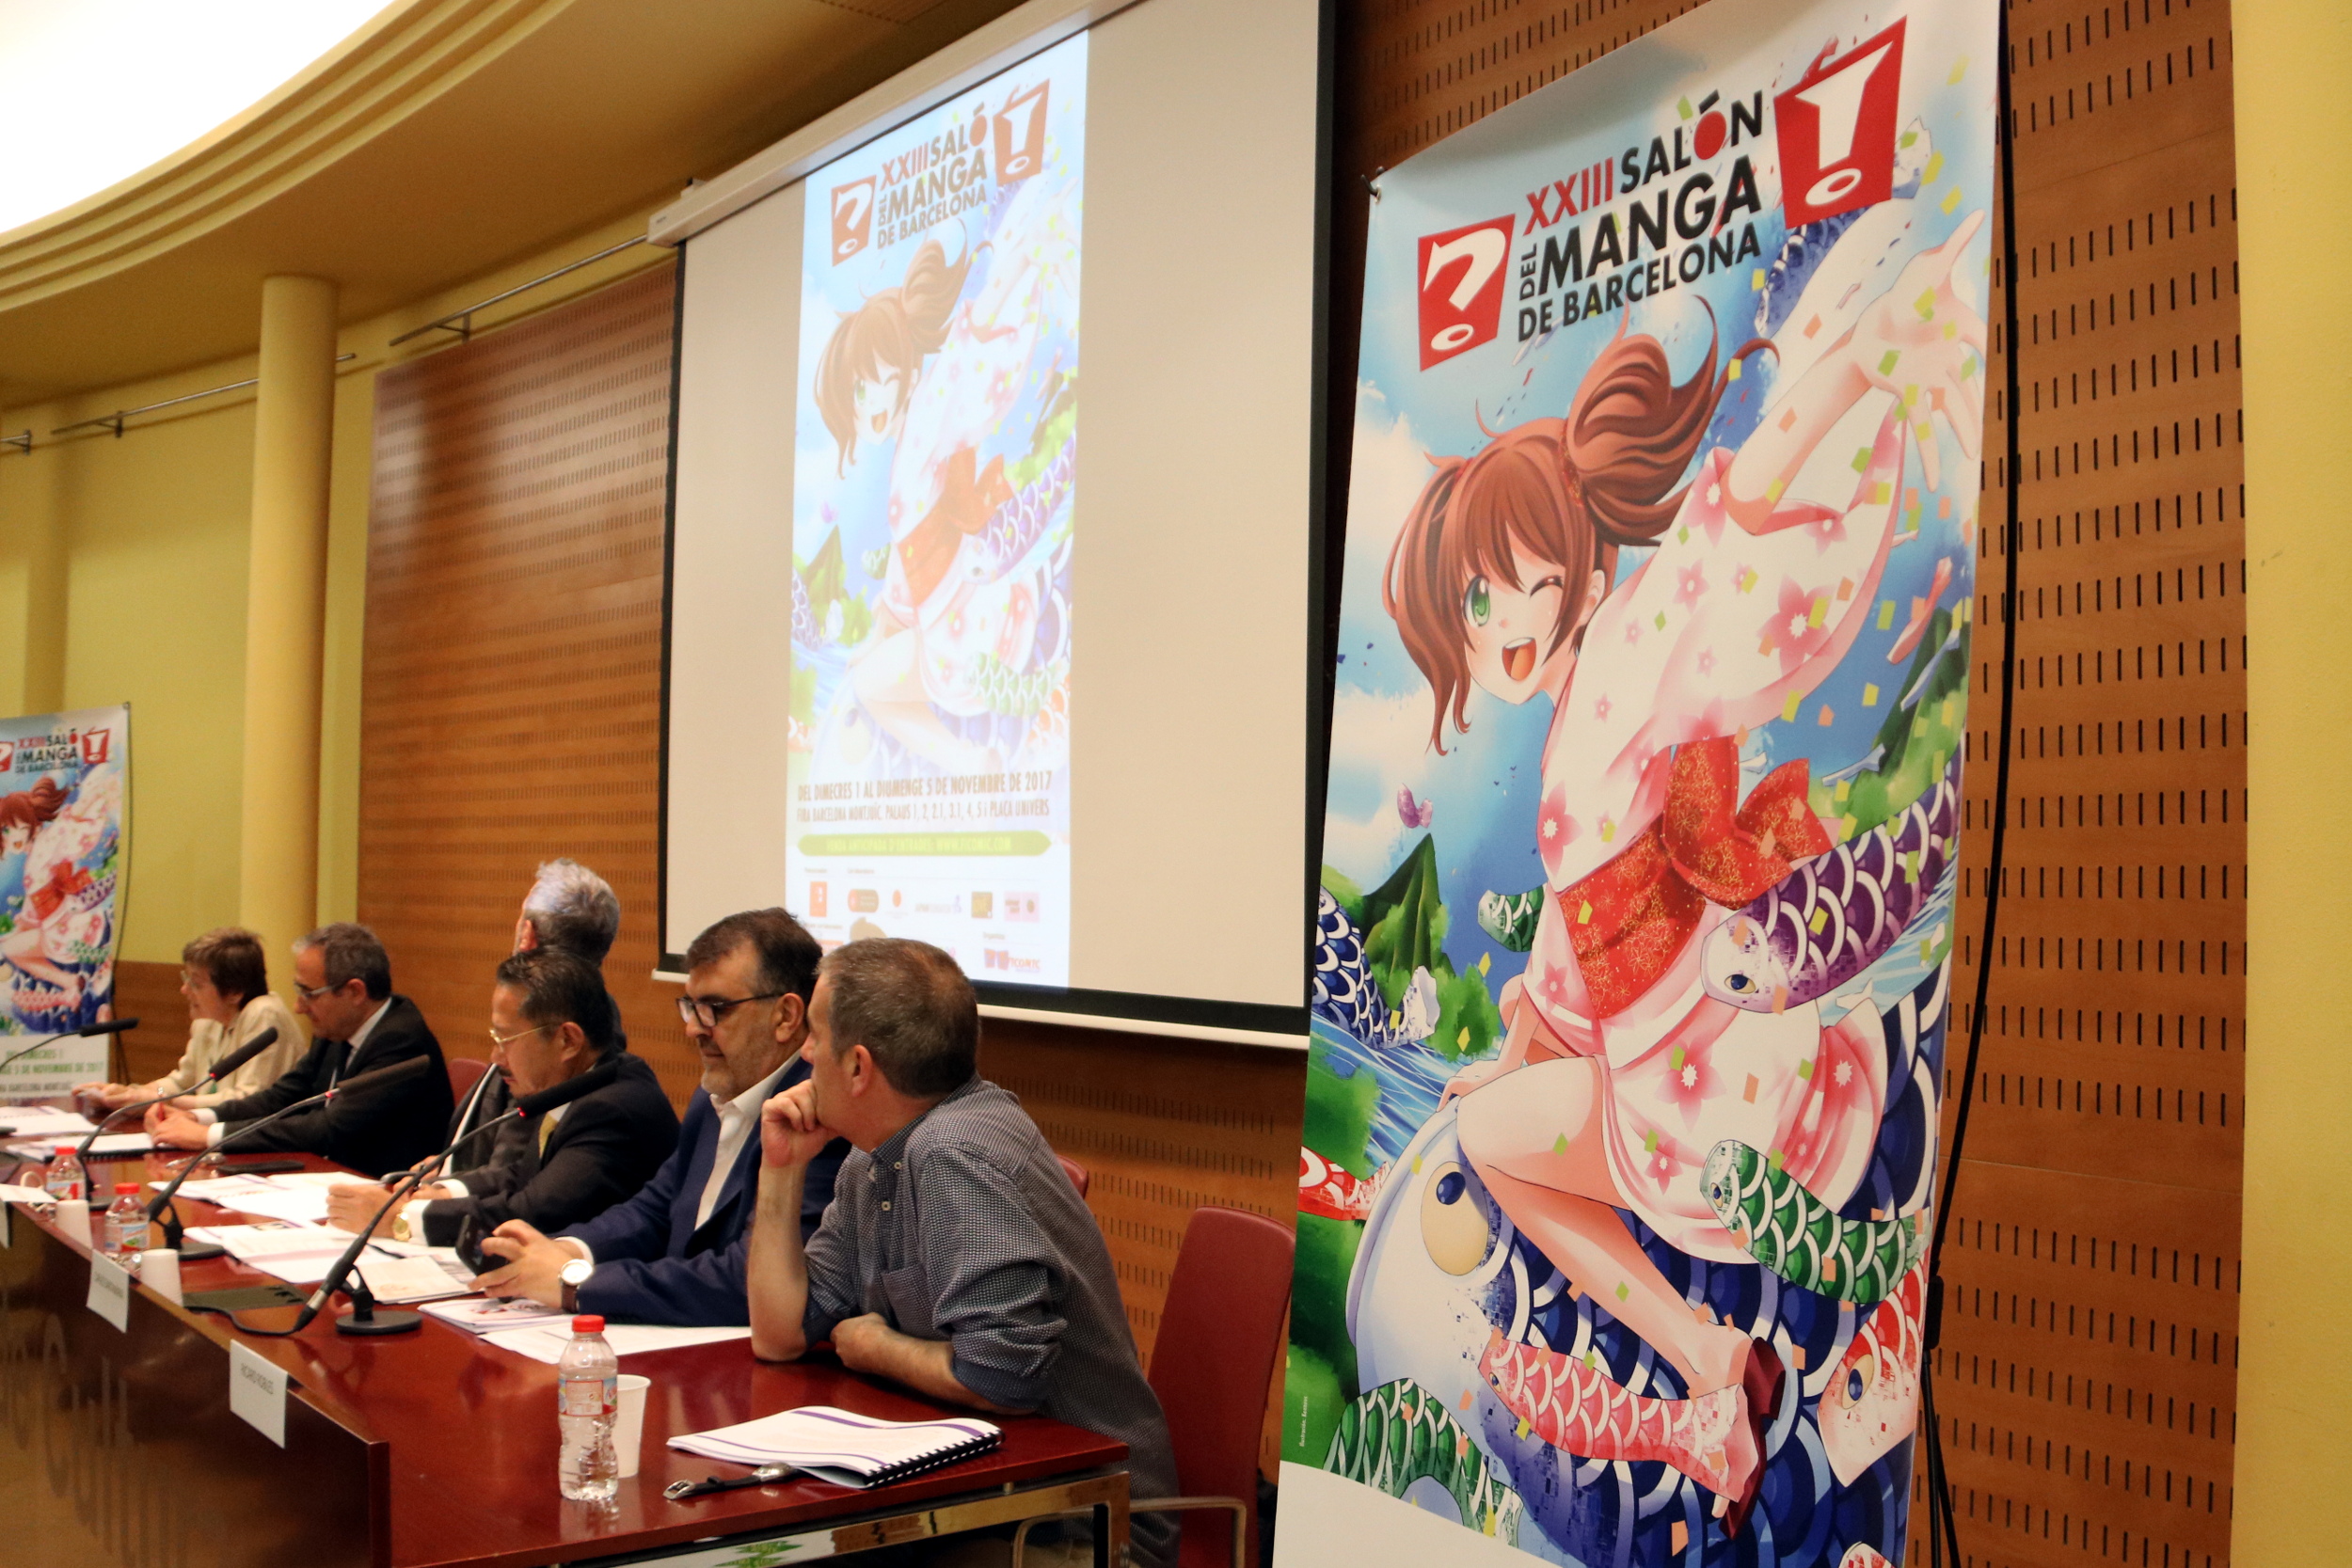 The press conference for the 23rd edition of the Manga fair in Barcelona, in June 2017 (by ACN)